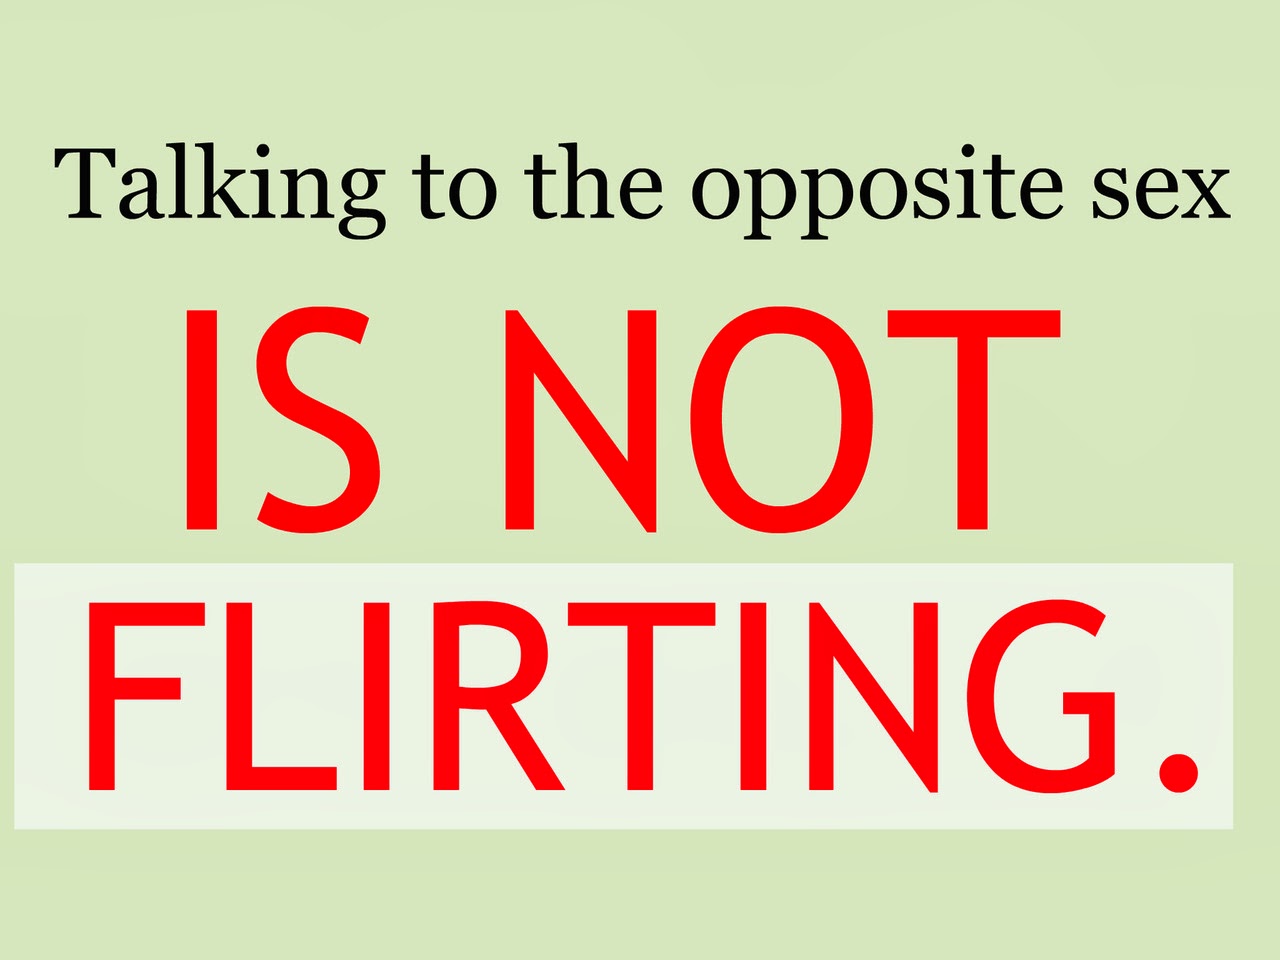 Talking To The Opposite Sex Is Not Flirting